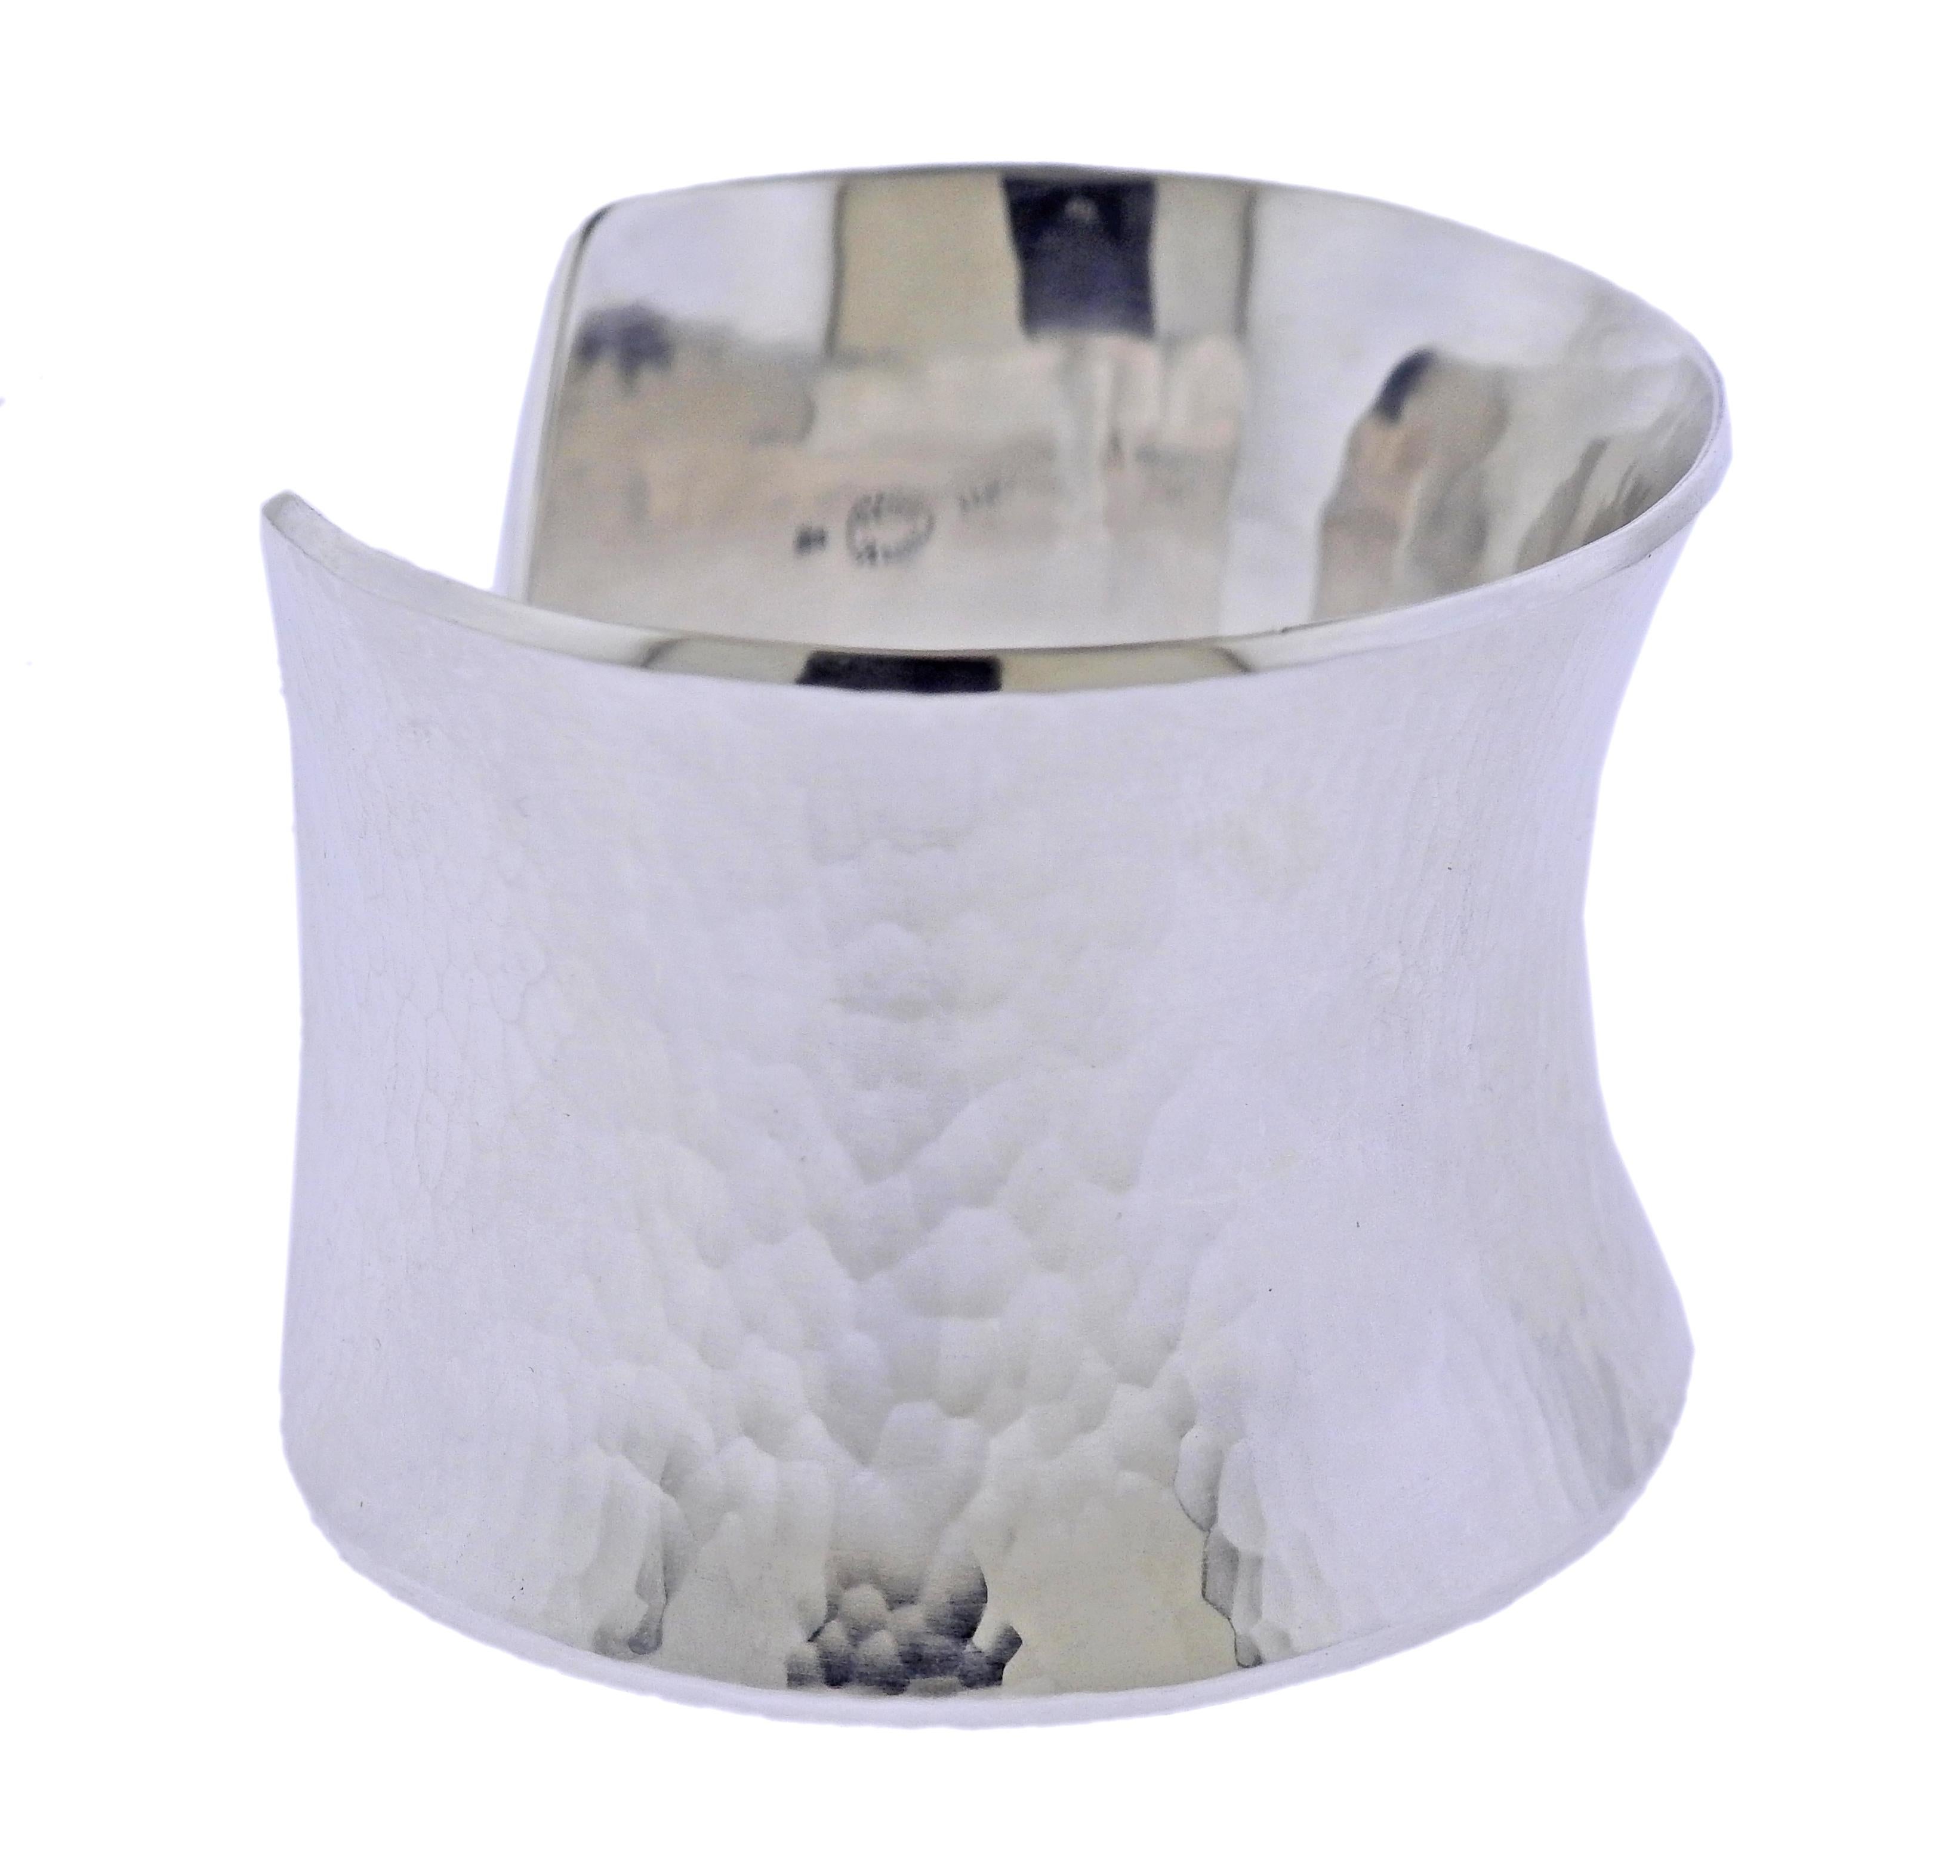 Brand new Georg Jensen sterling silver cuff bracelet from Archive collection. Bracelet will fit approx. 7